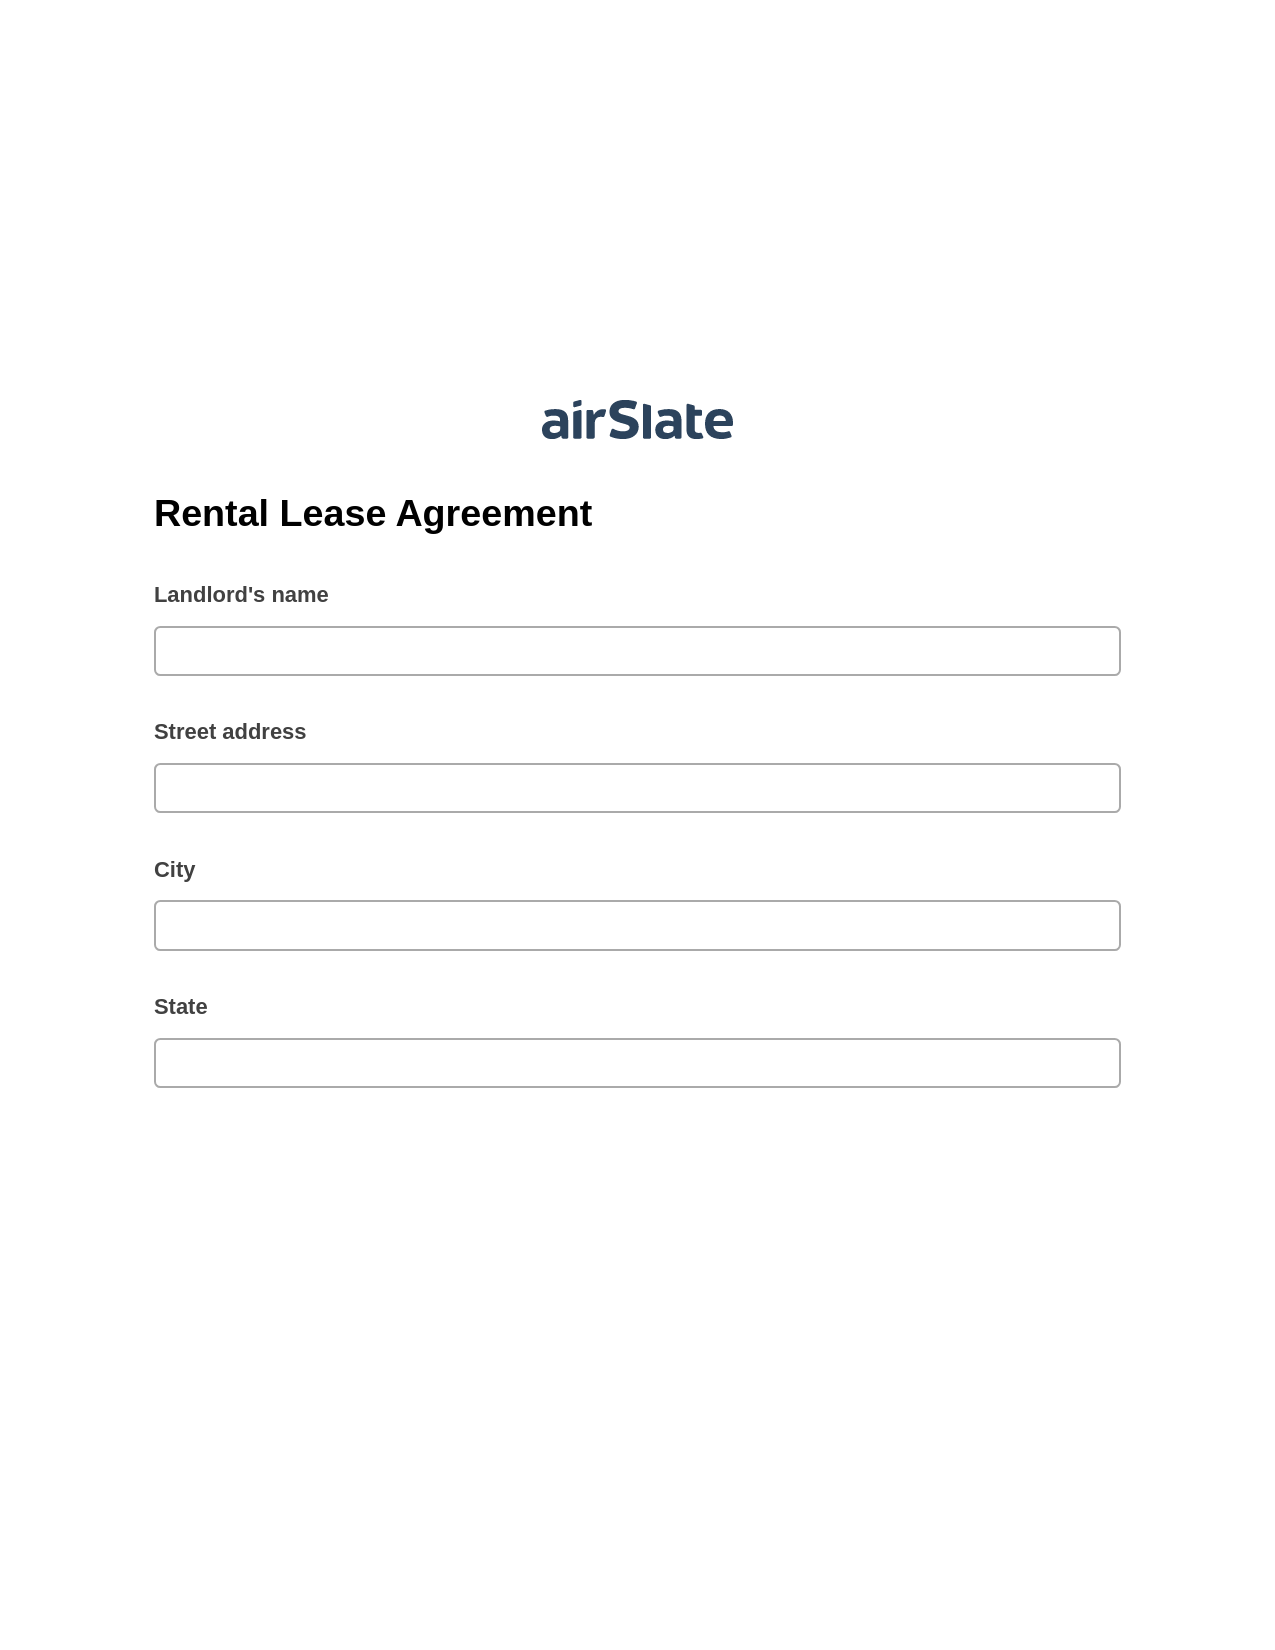 Multirole Rental Lease Agreement Pre-fill Slate from MS Dynamics 365 Records Bot, Document Hide Bot, Export to Google Sheet Bot